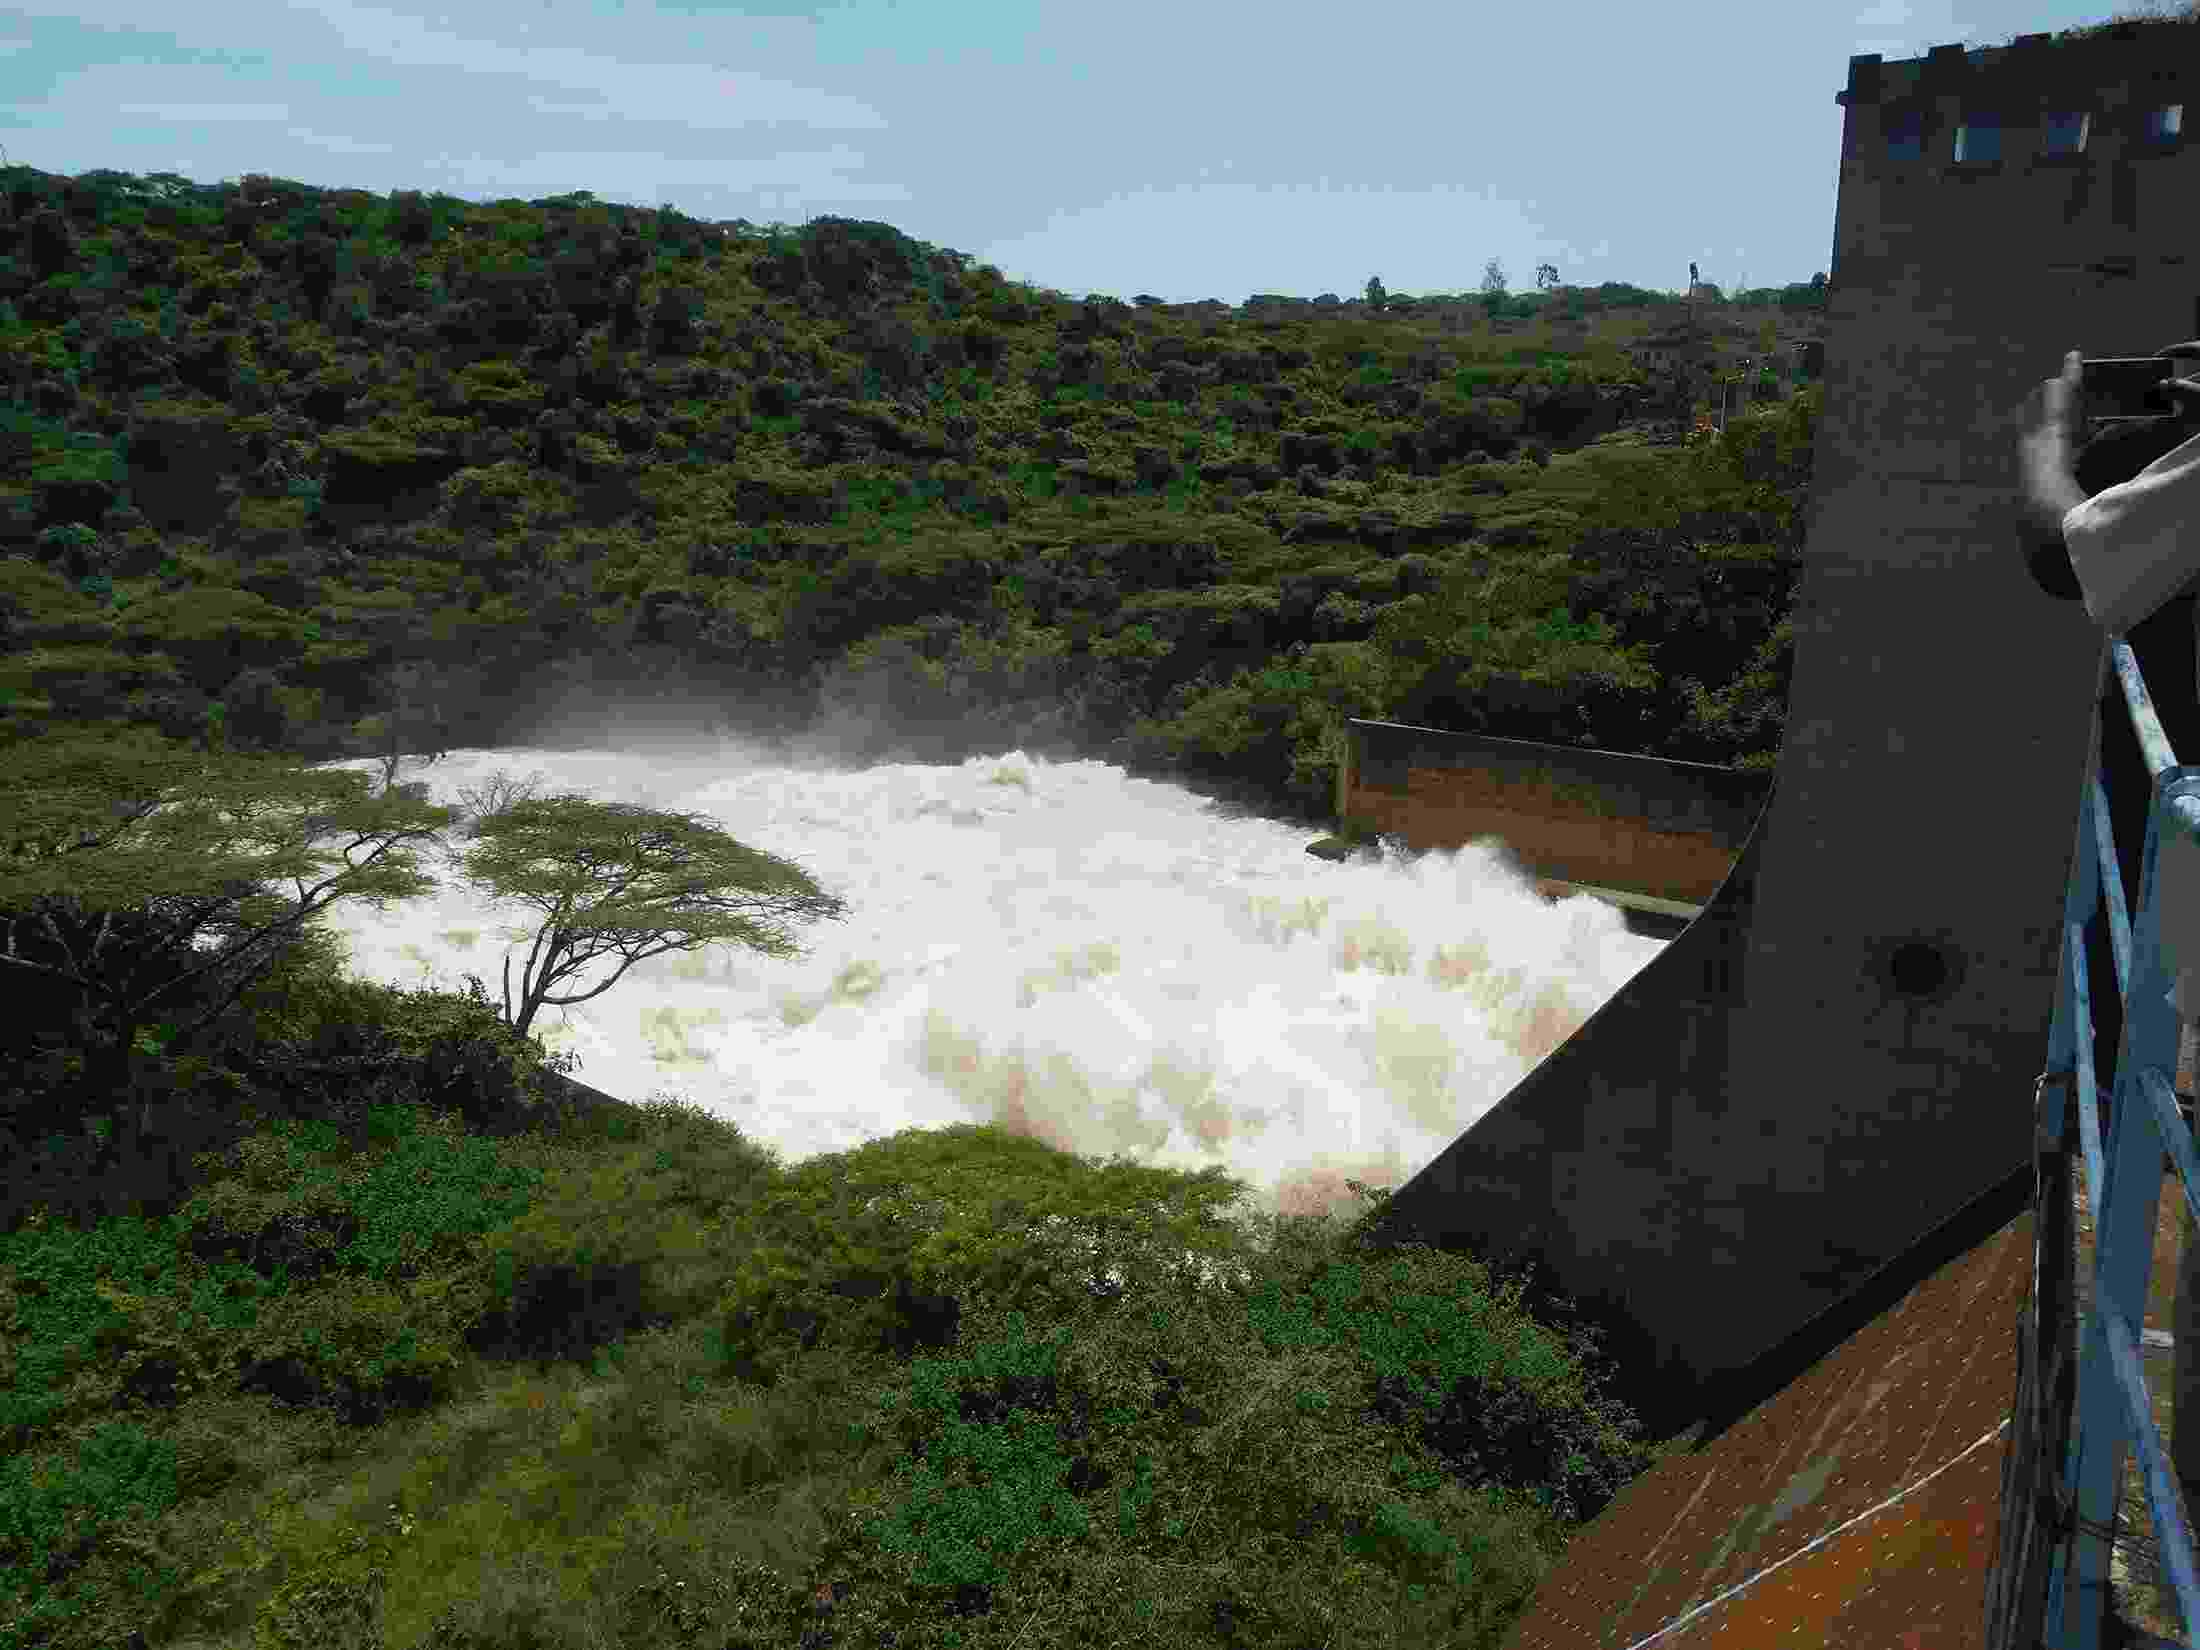 Over-the-side view from the Koka Dam on the Awash River, with water surging out from an opening in the dam, surrounded by lush greenery